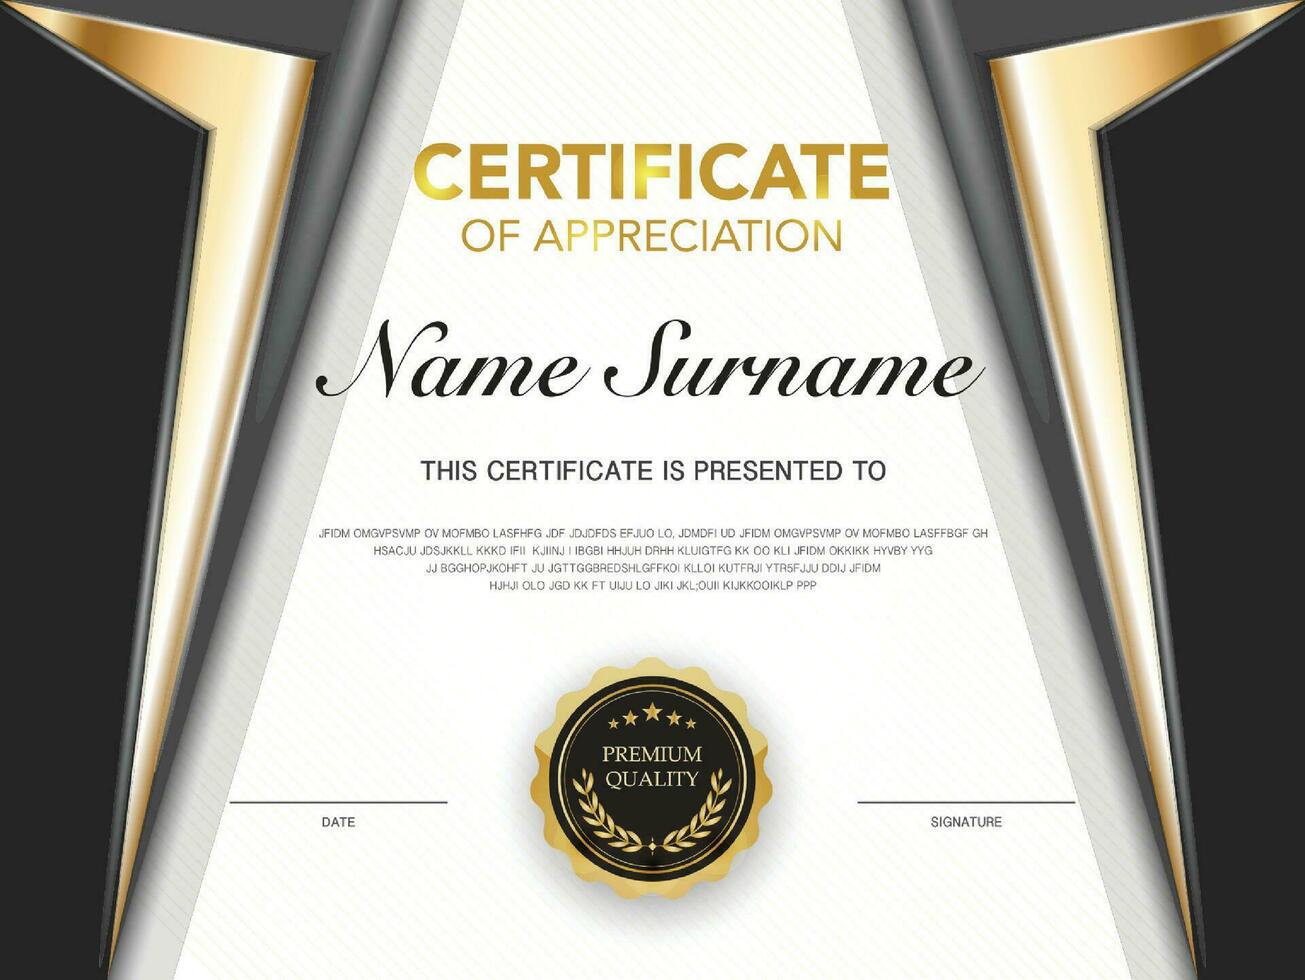 certificate of achievement template black and gold color with luxury and modern style vector image. awards diploma of work. illustration gift card design.